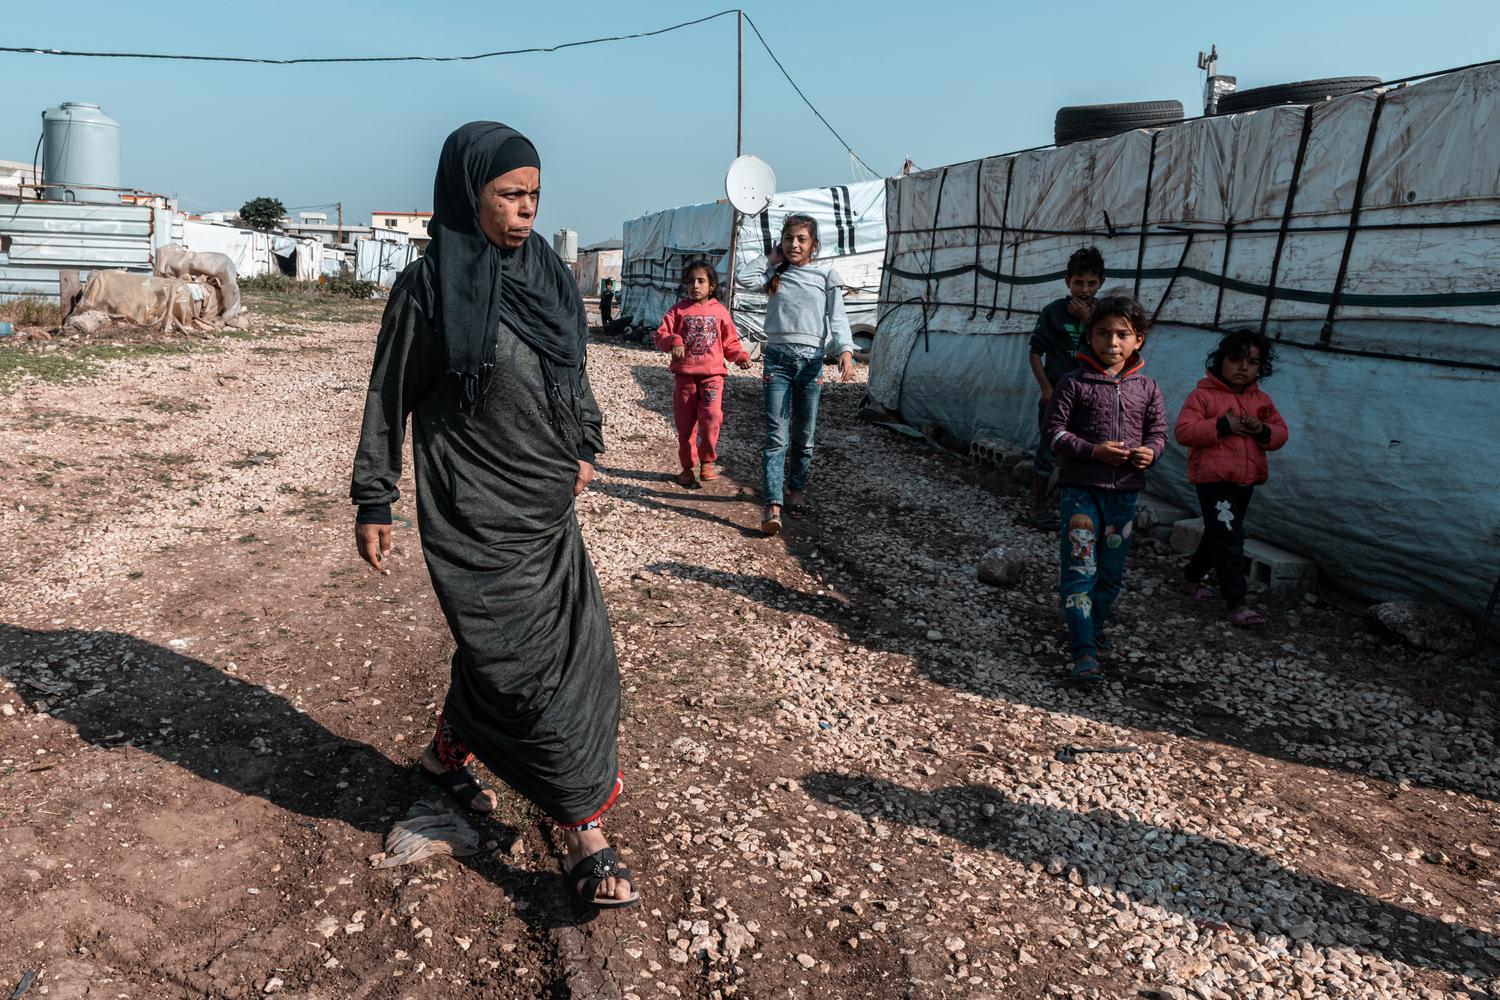 Samaher, a 40-year-old Syrian refugee, walks in the informal tented settlement in Akkar, north Lebanon, where she lives with her husband and her four children. Lebanon, December 2020. Karine Pierre/Hans Lucas for MSF